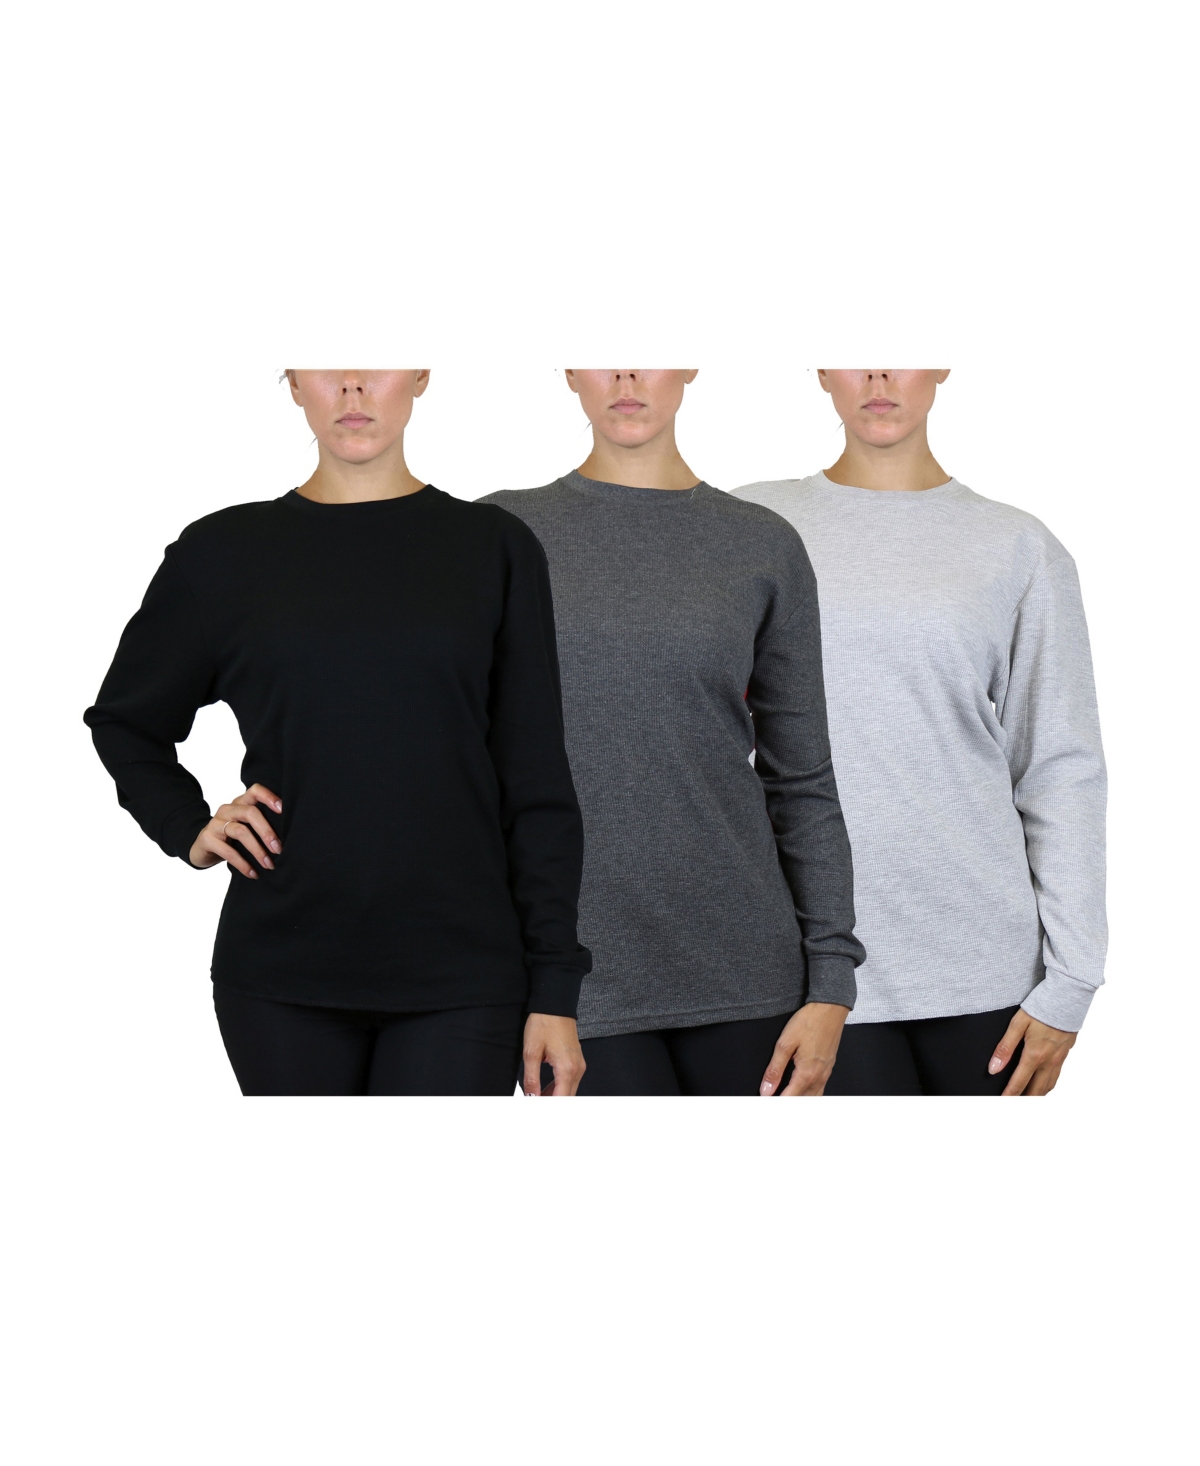 Women's Loose Fit Waffle Knit Thermal Shirt, Pack of 3 - Navy, Olive, Burgundy